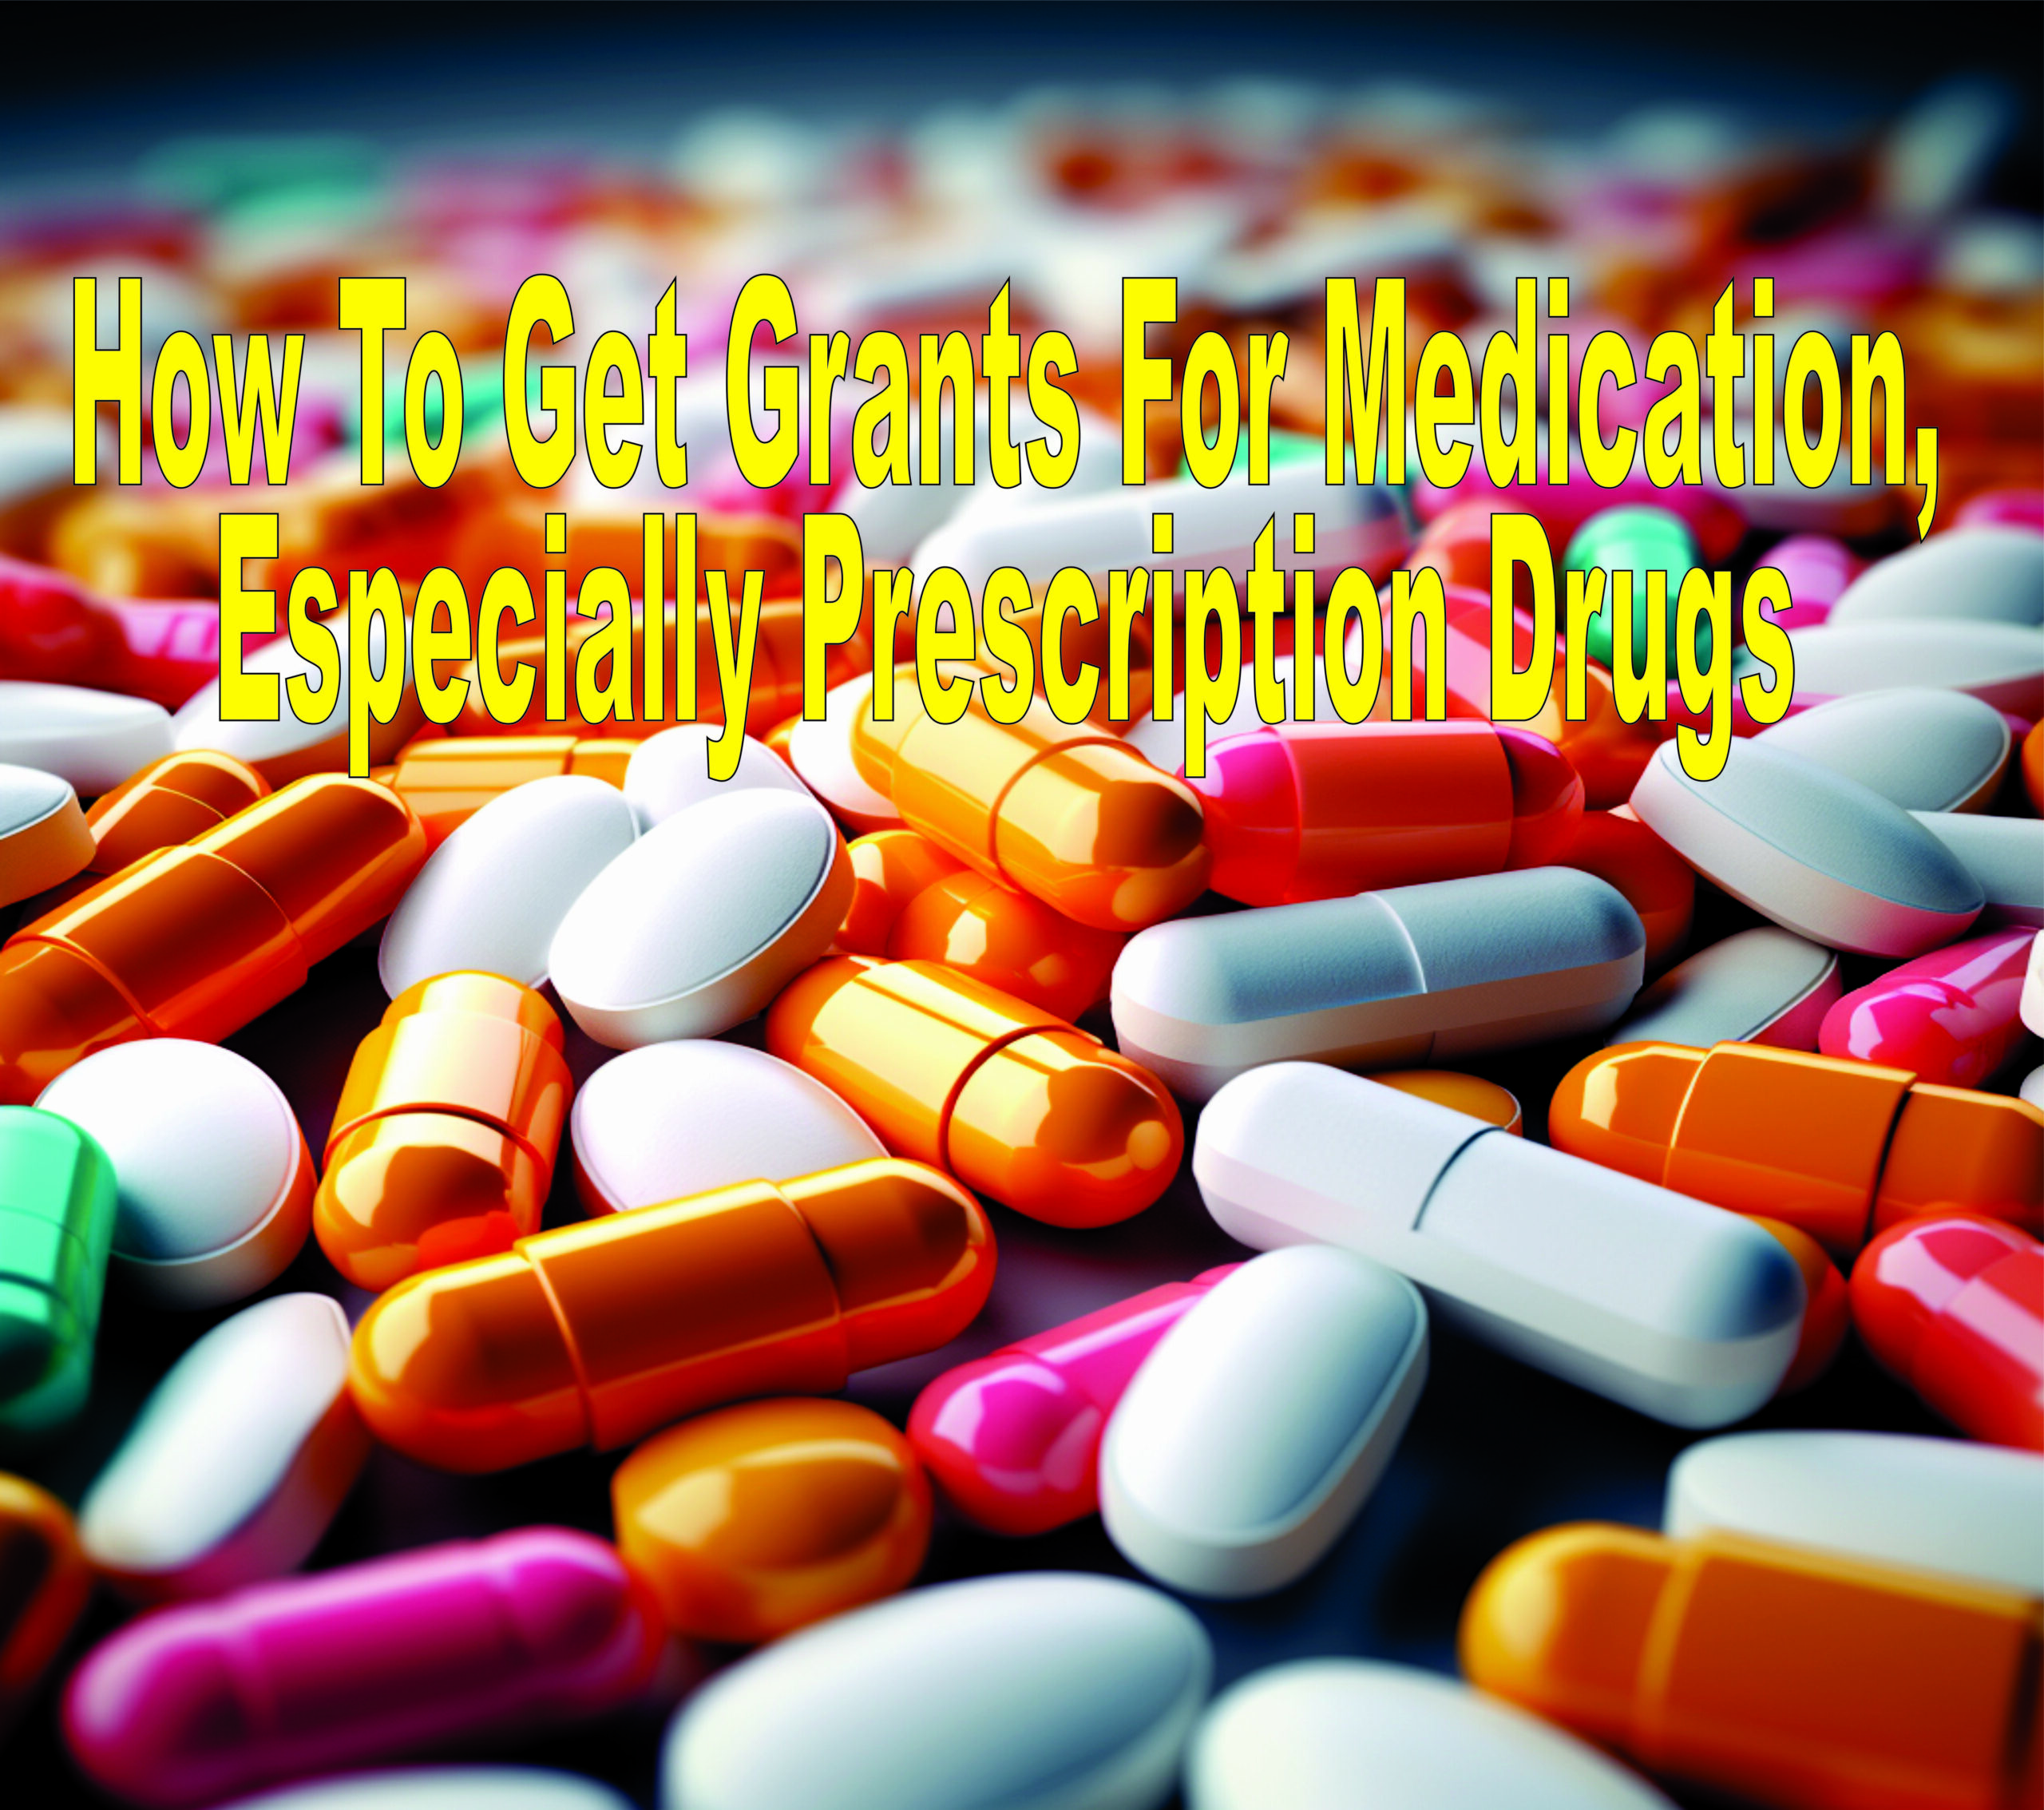 How To Get Grants For Medication, Especially Prescription Drugs